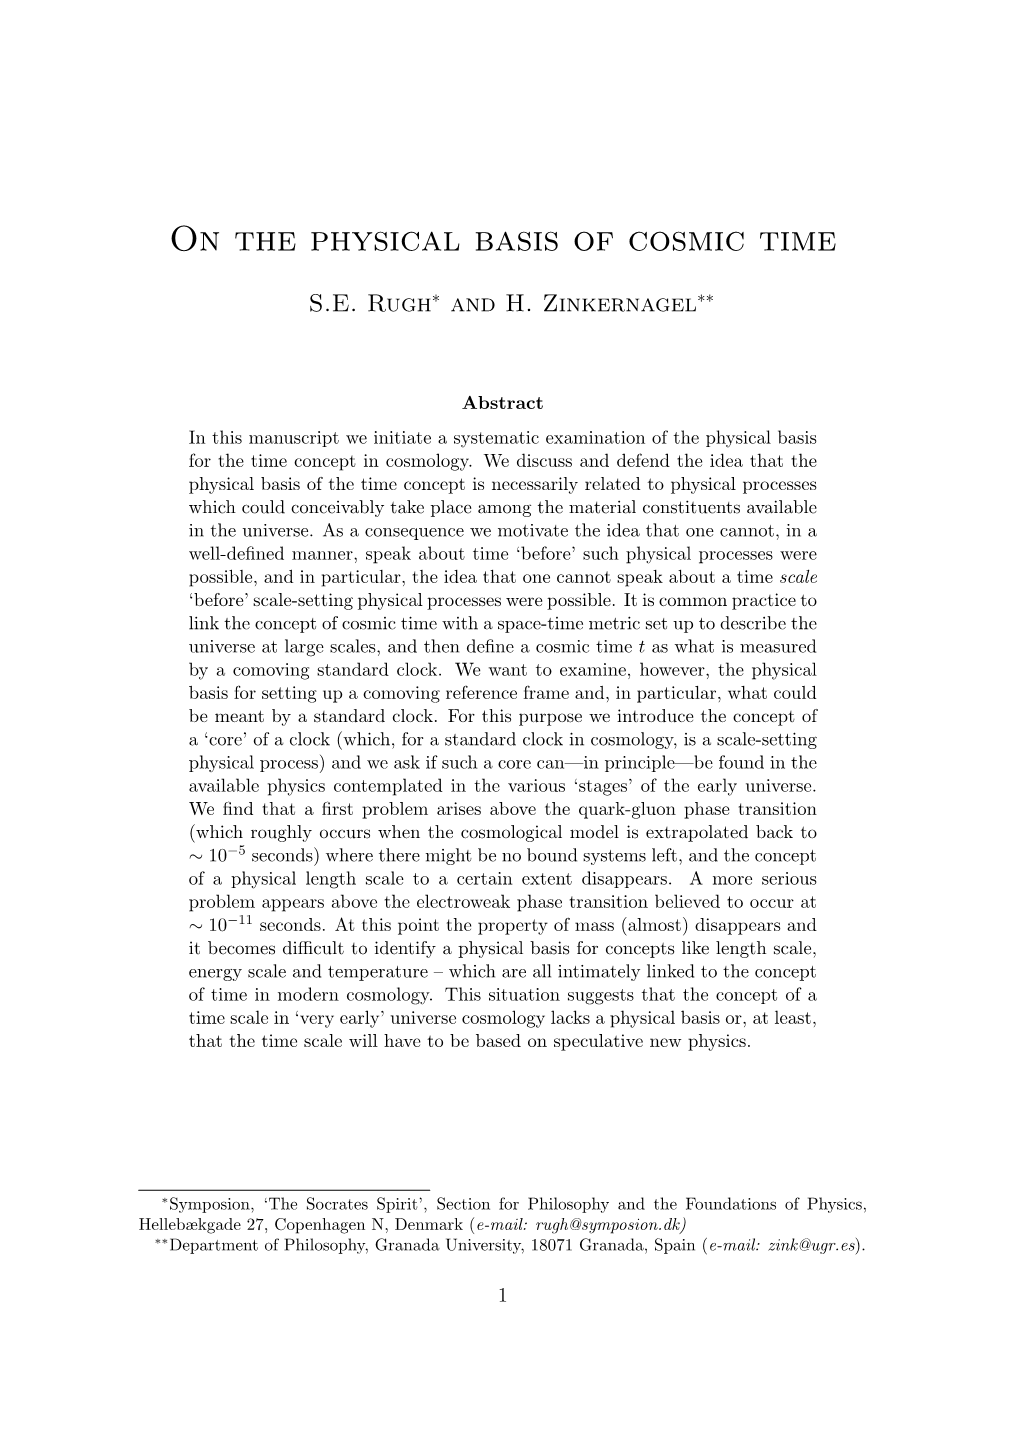 On the Physical Basis of Cosmic Time